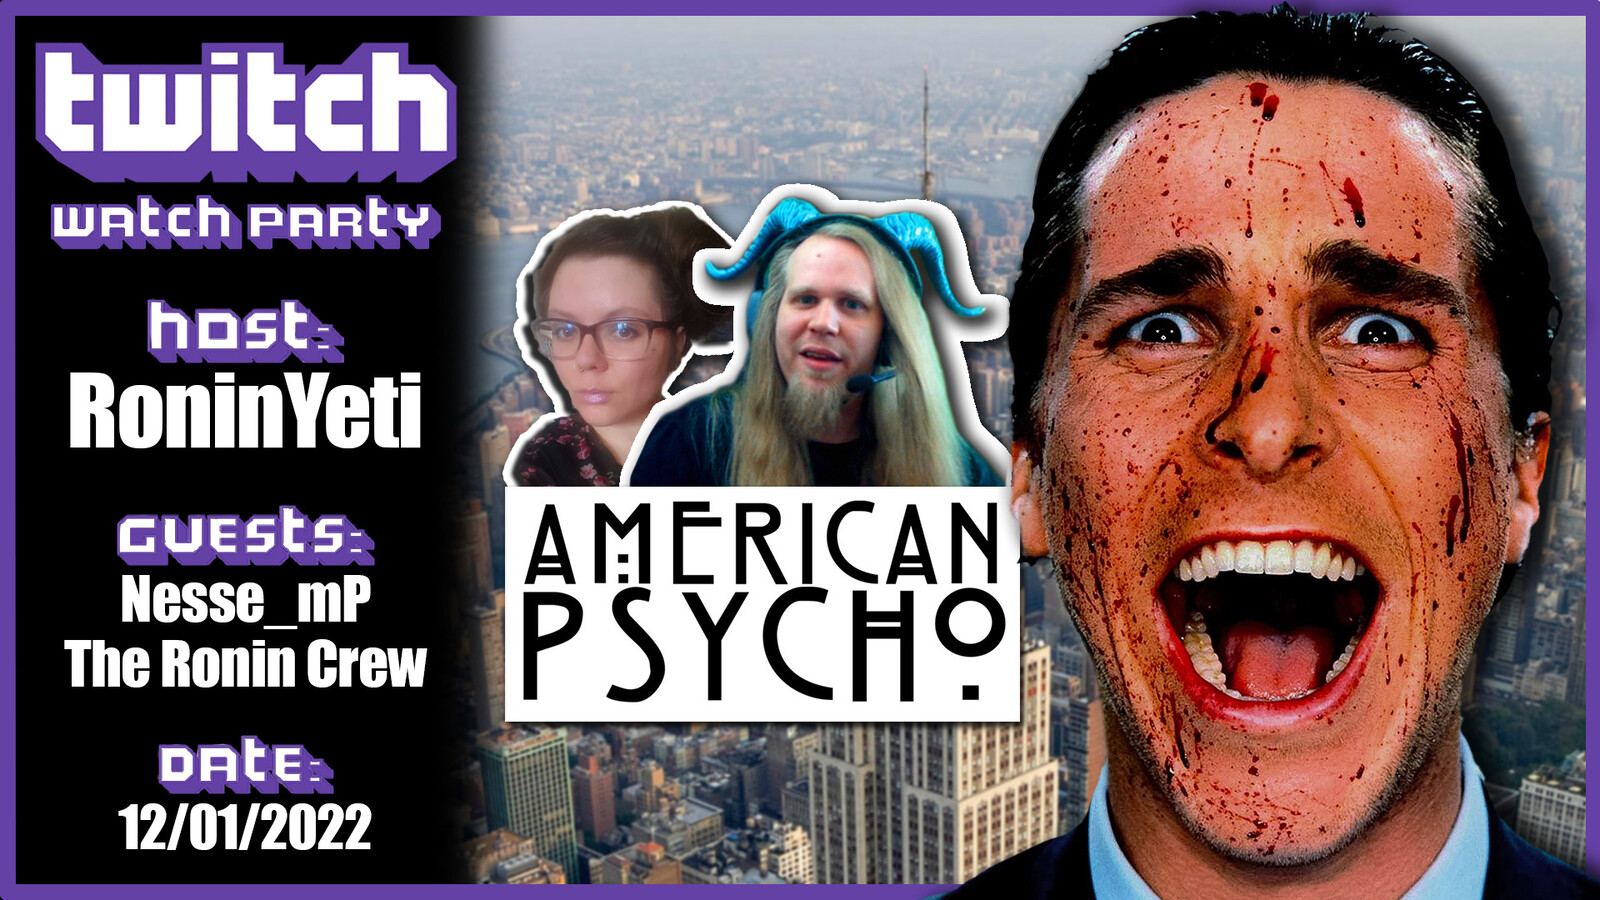 "American Psycho" Twitch Watch Party Advert